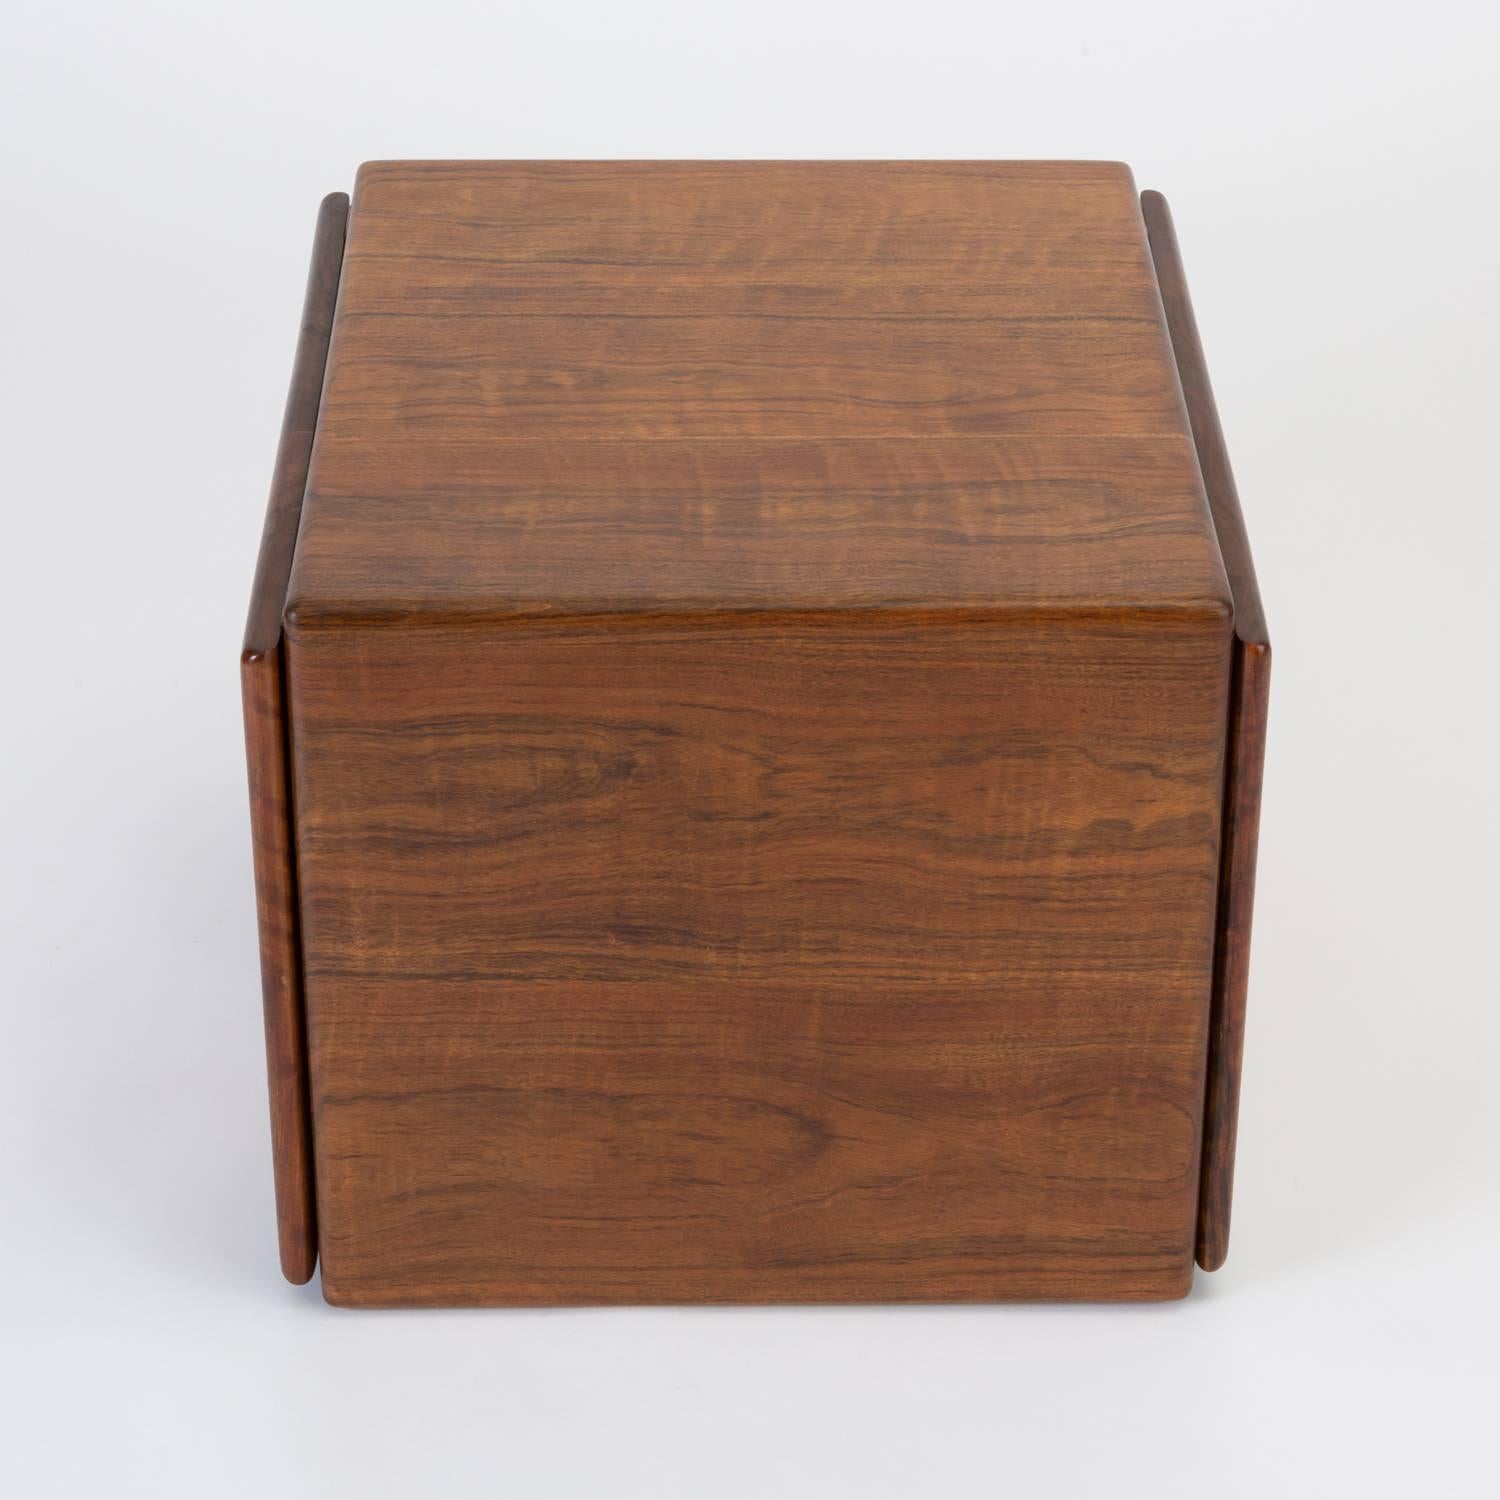 Mid-Century Modern Cube Side Table or Storage Chest in Rare African Shedua Wood by Gerald McCabe